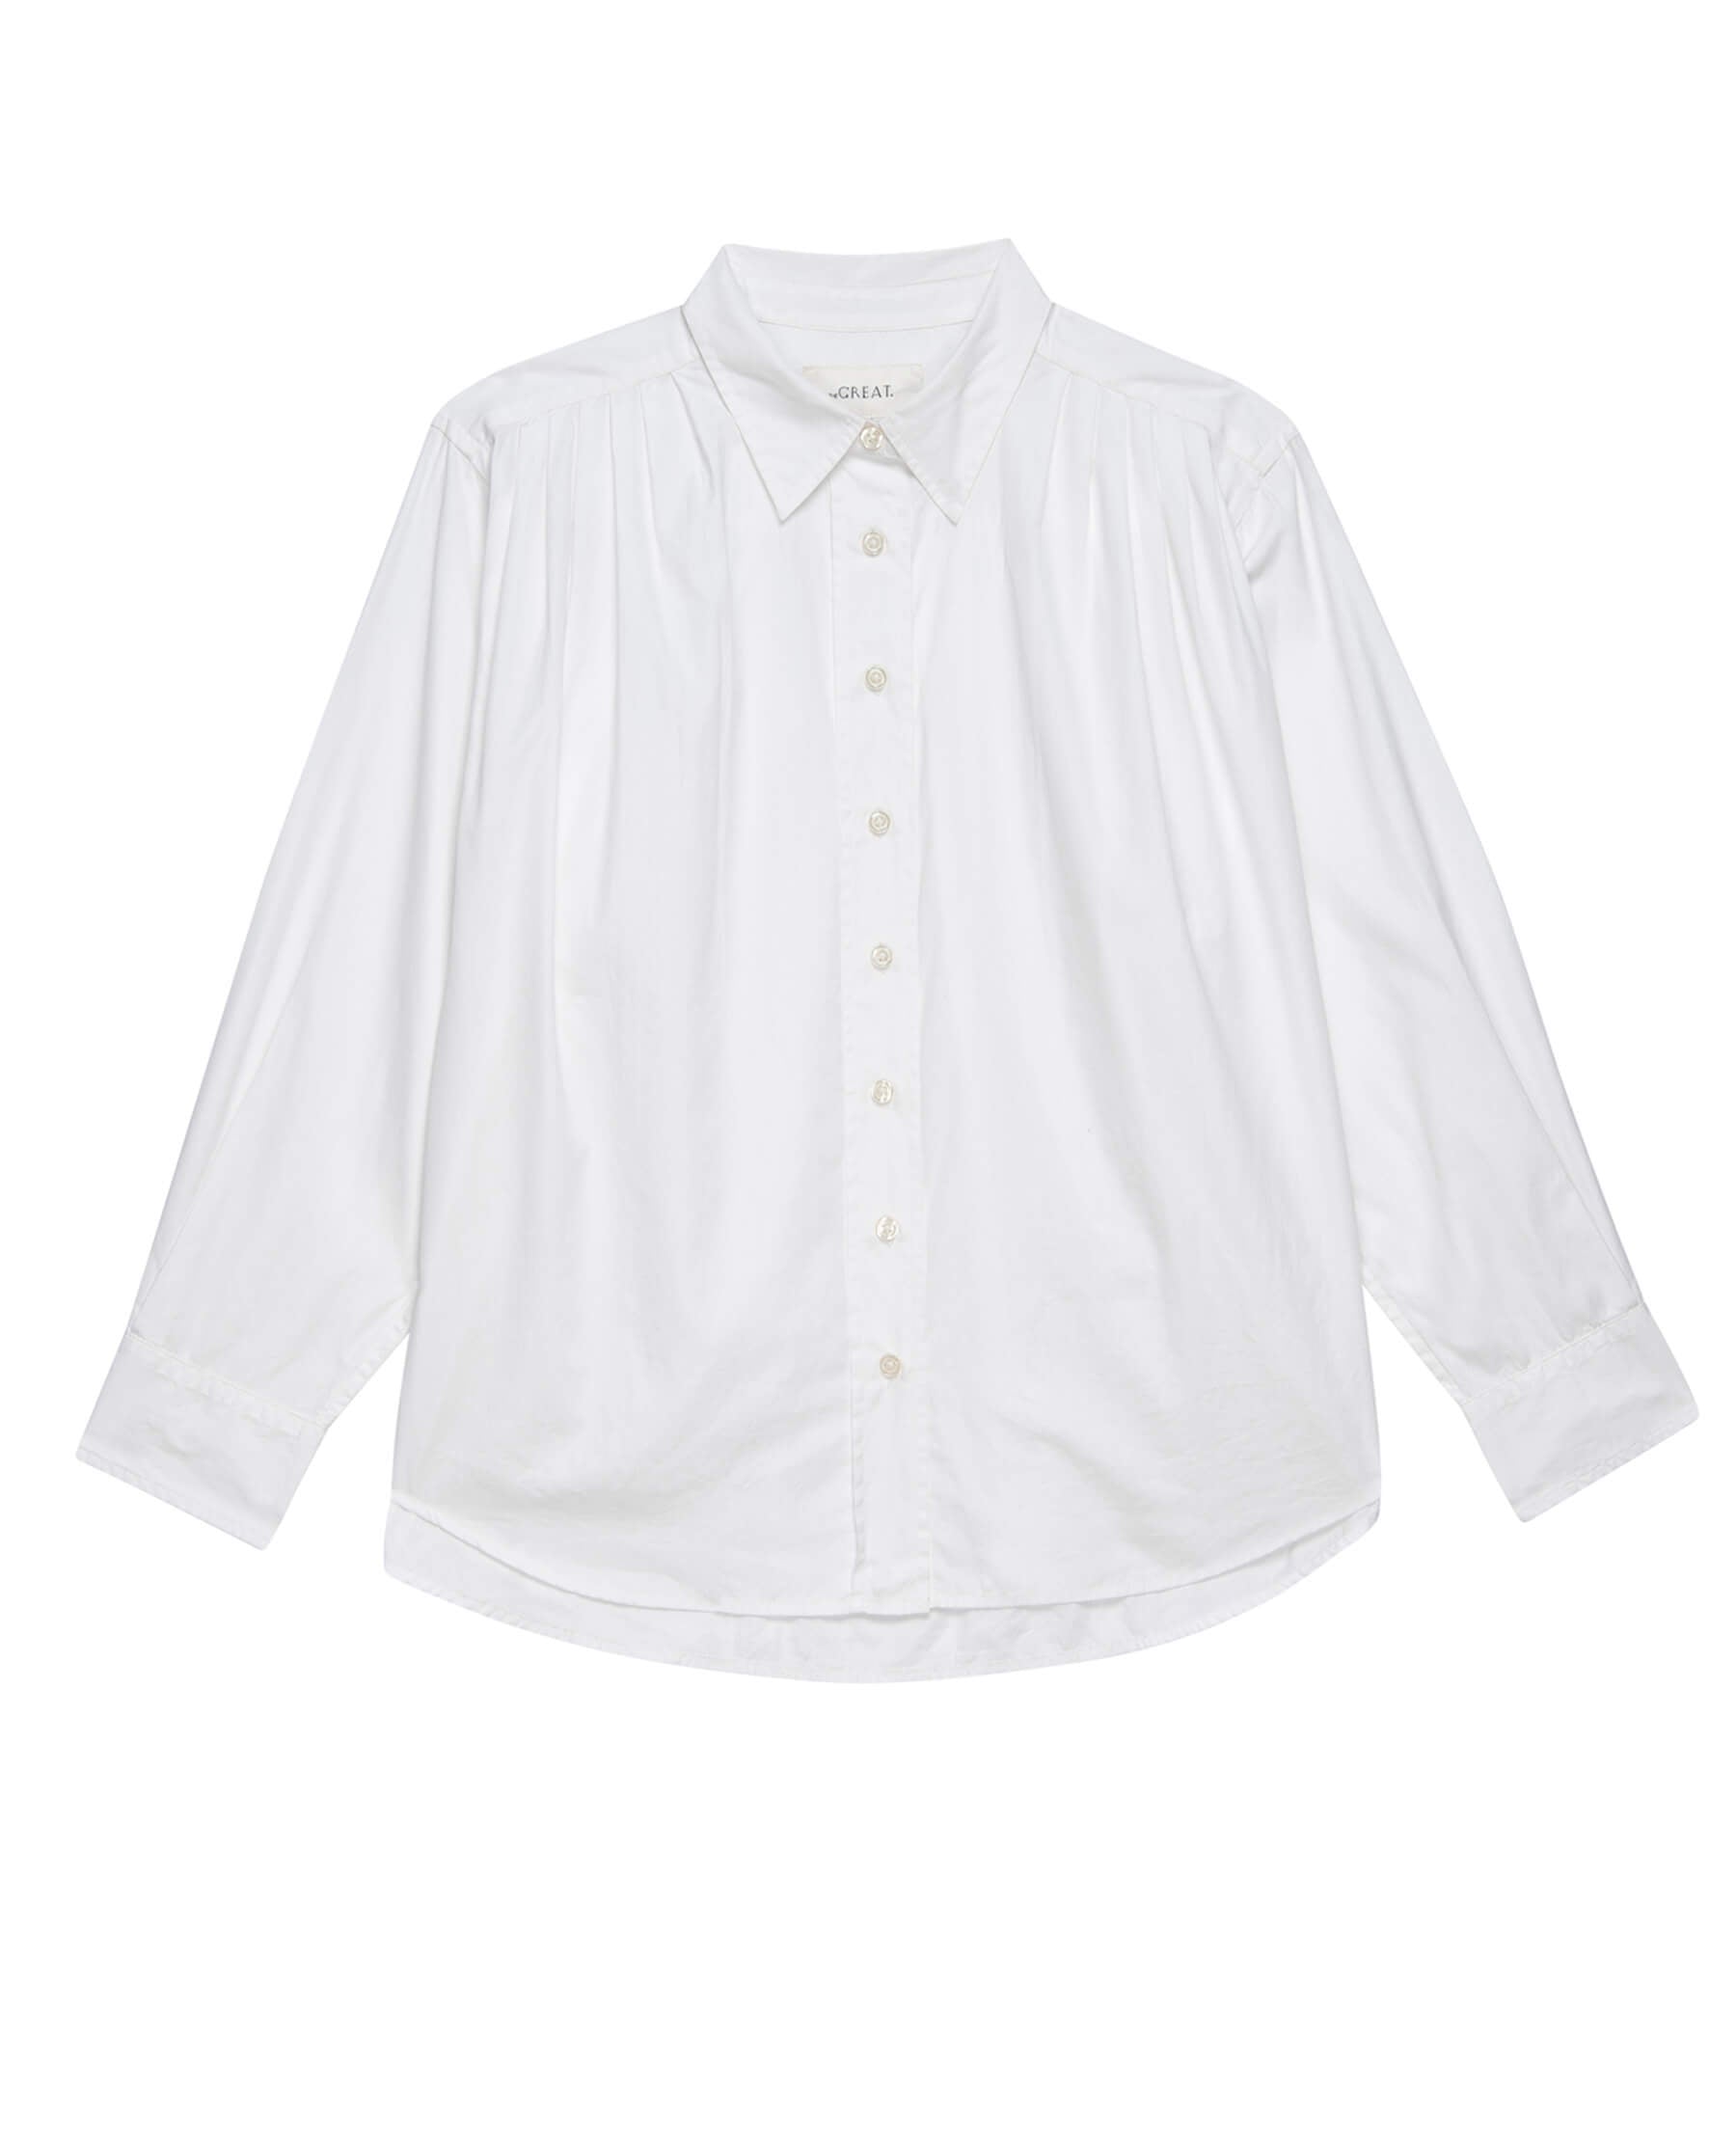 The Society Top. -- True White SHIRTS THE GREAT. SP24 POPLIN